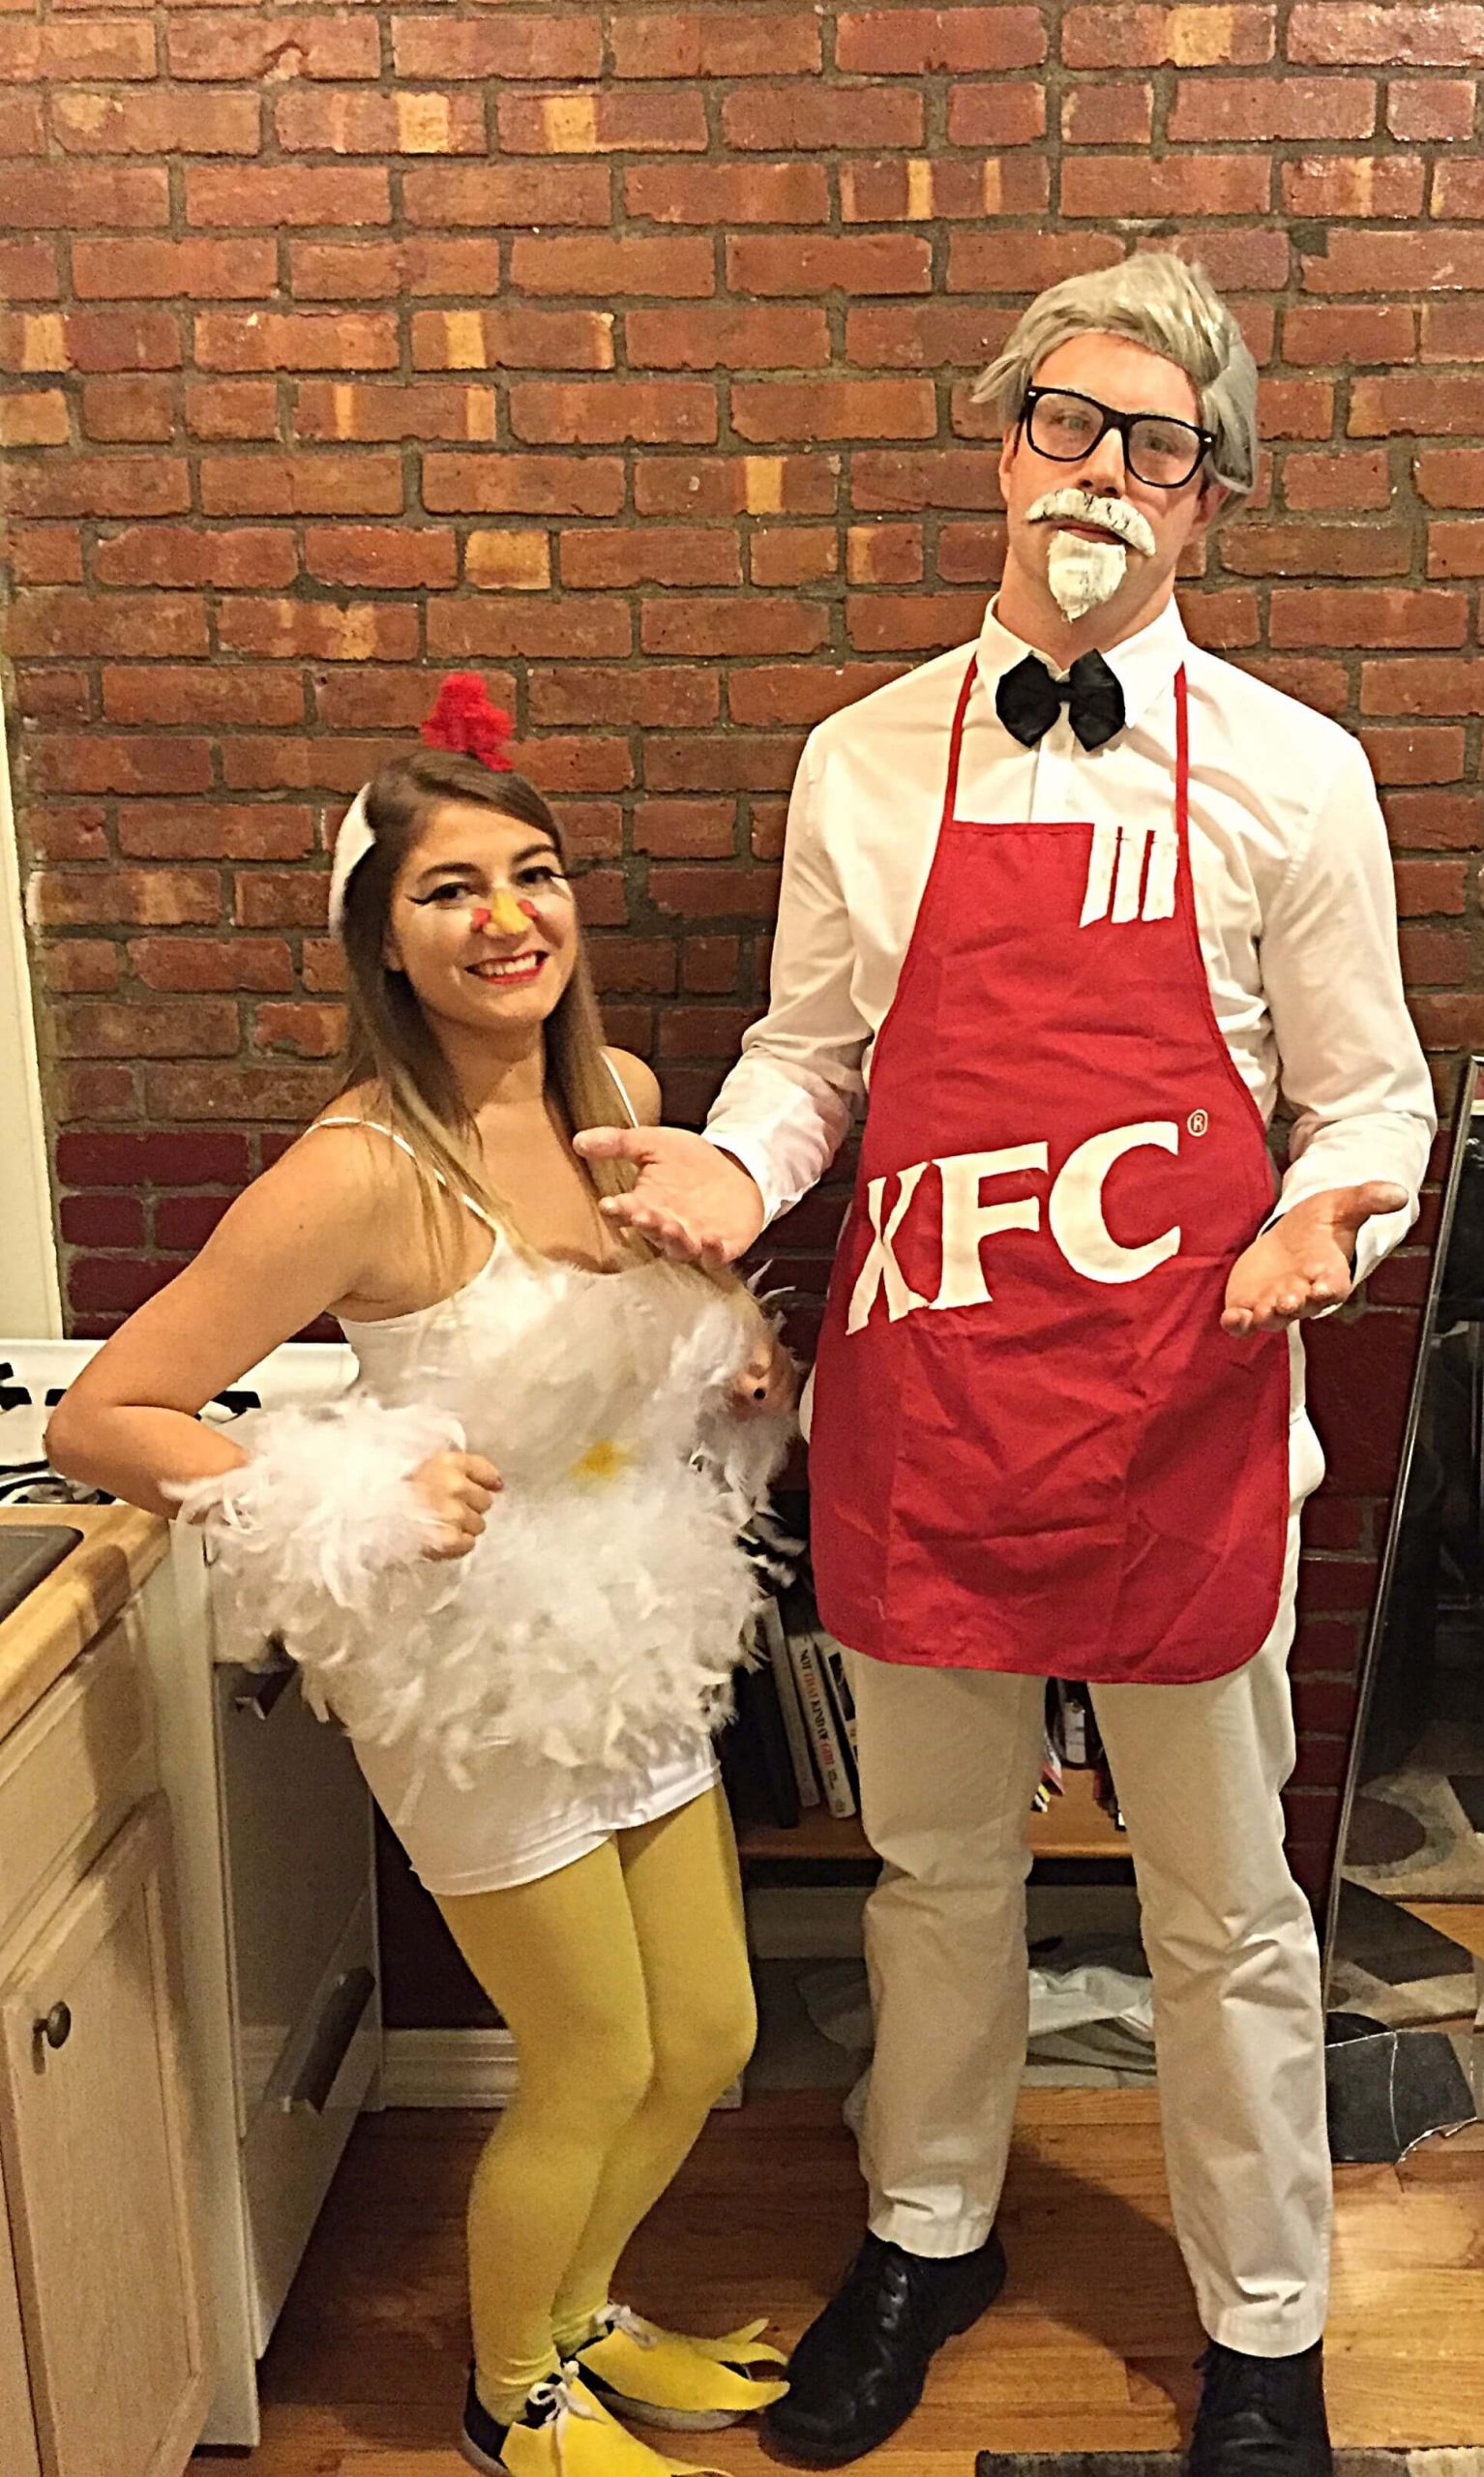 Funny DIY Costumes
 67 Halloween Costumes for Couples That are Funny And Spooky